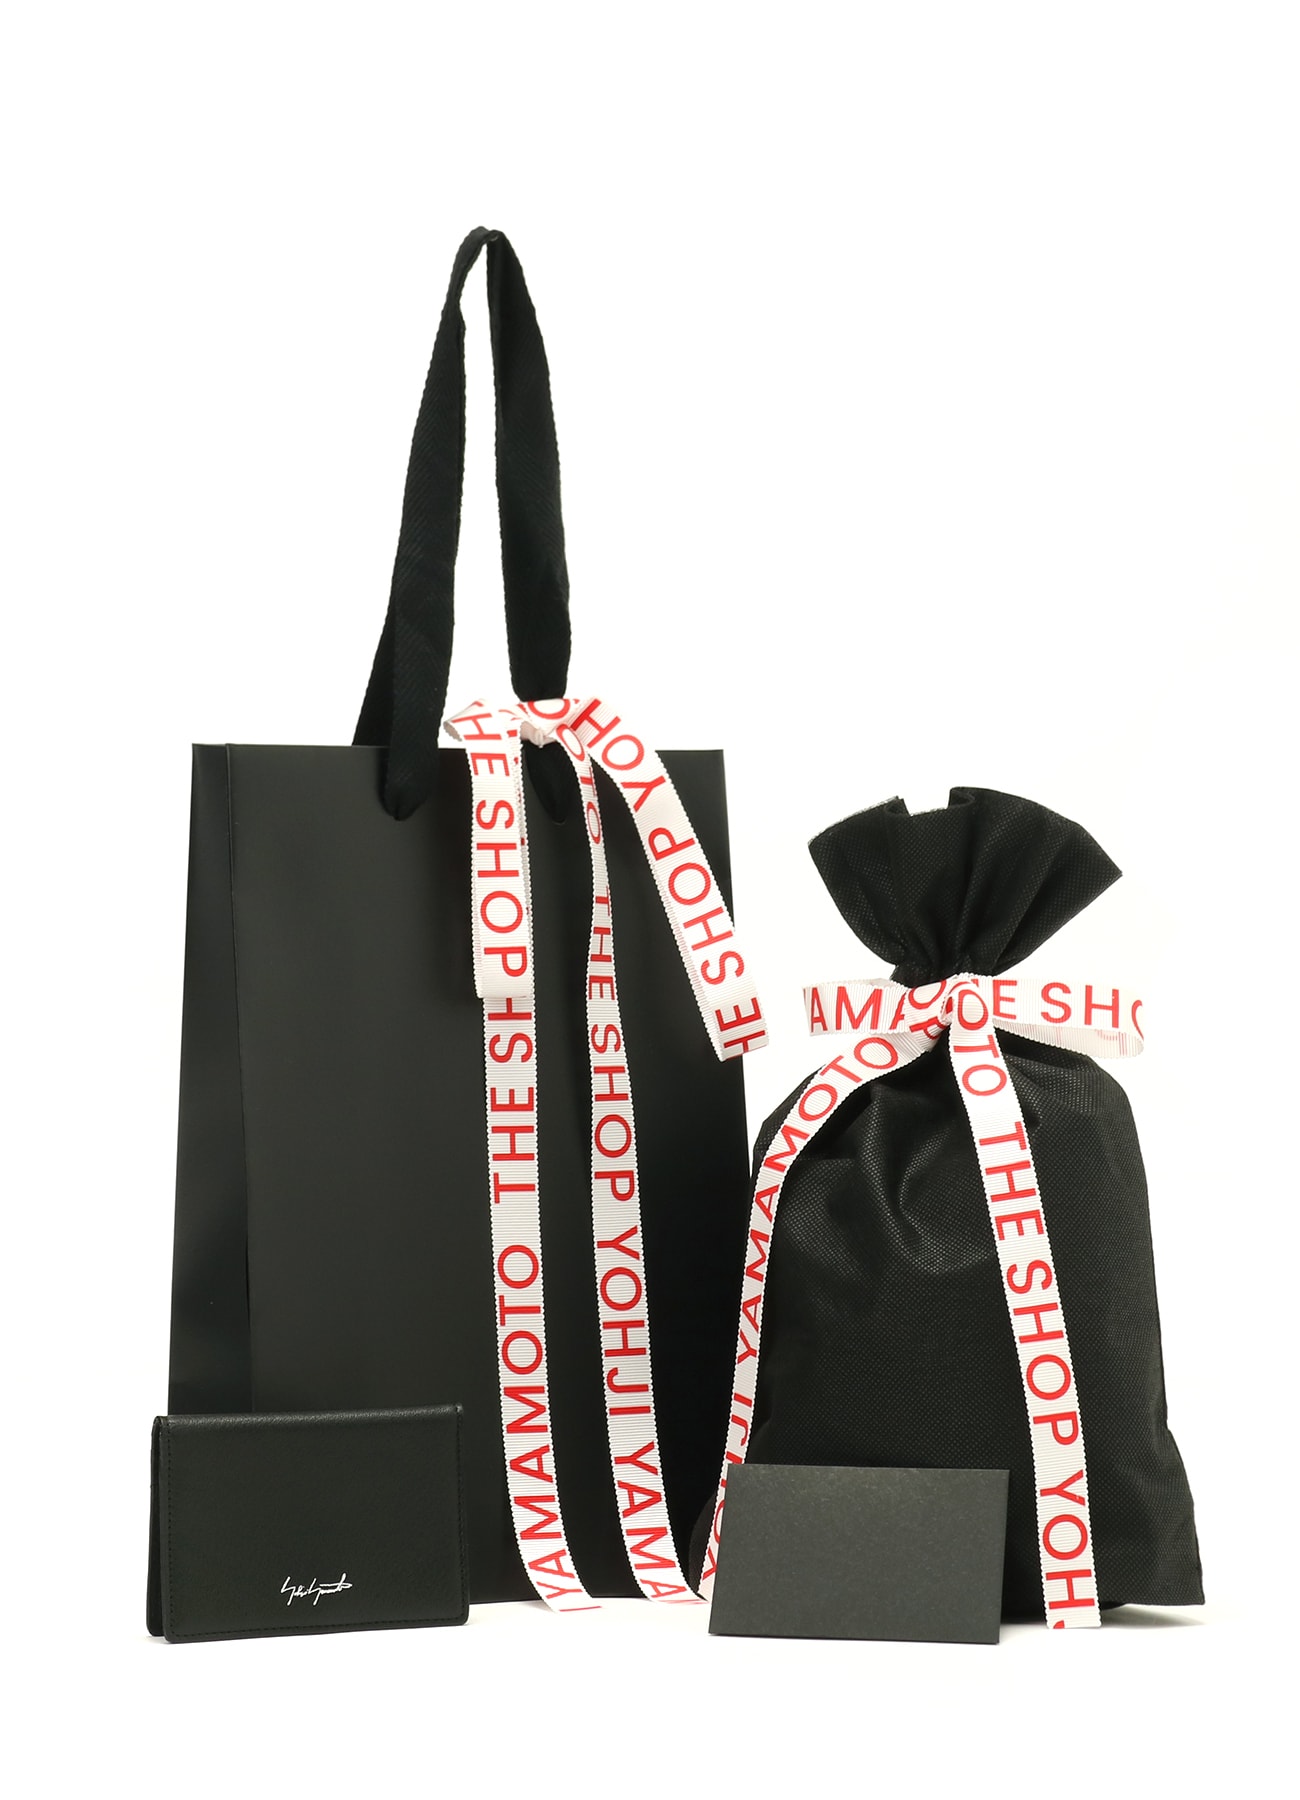 Self-wrap THE SHOP GIFT KIT (S) (WhitexRed)	